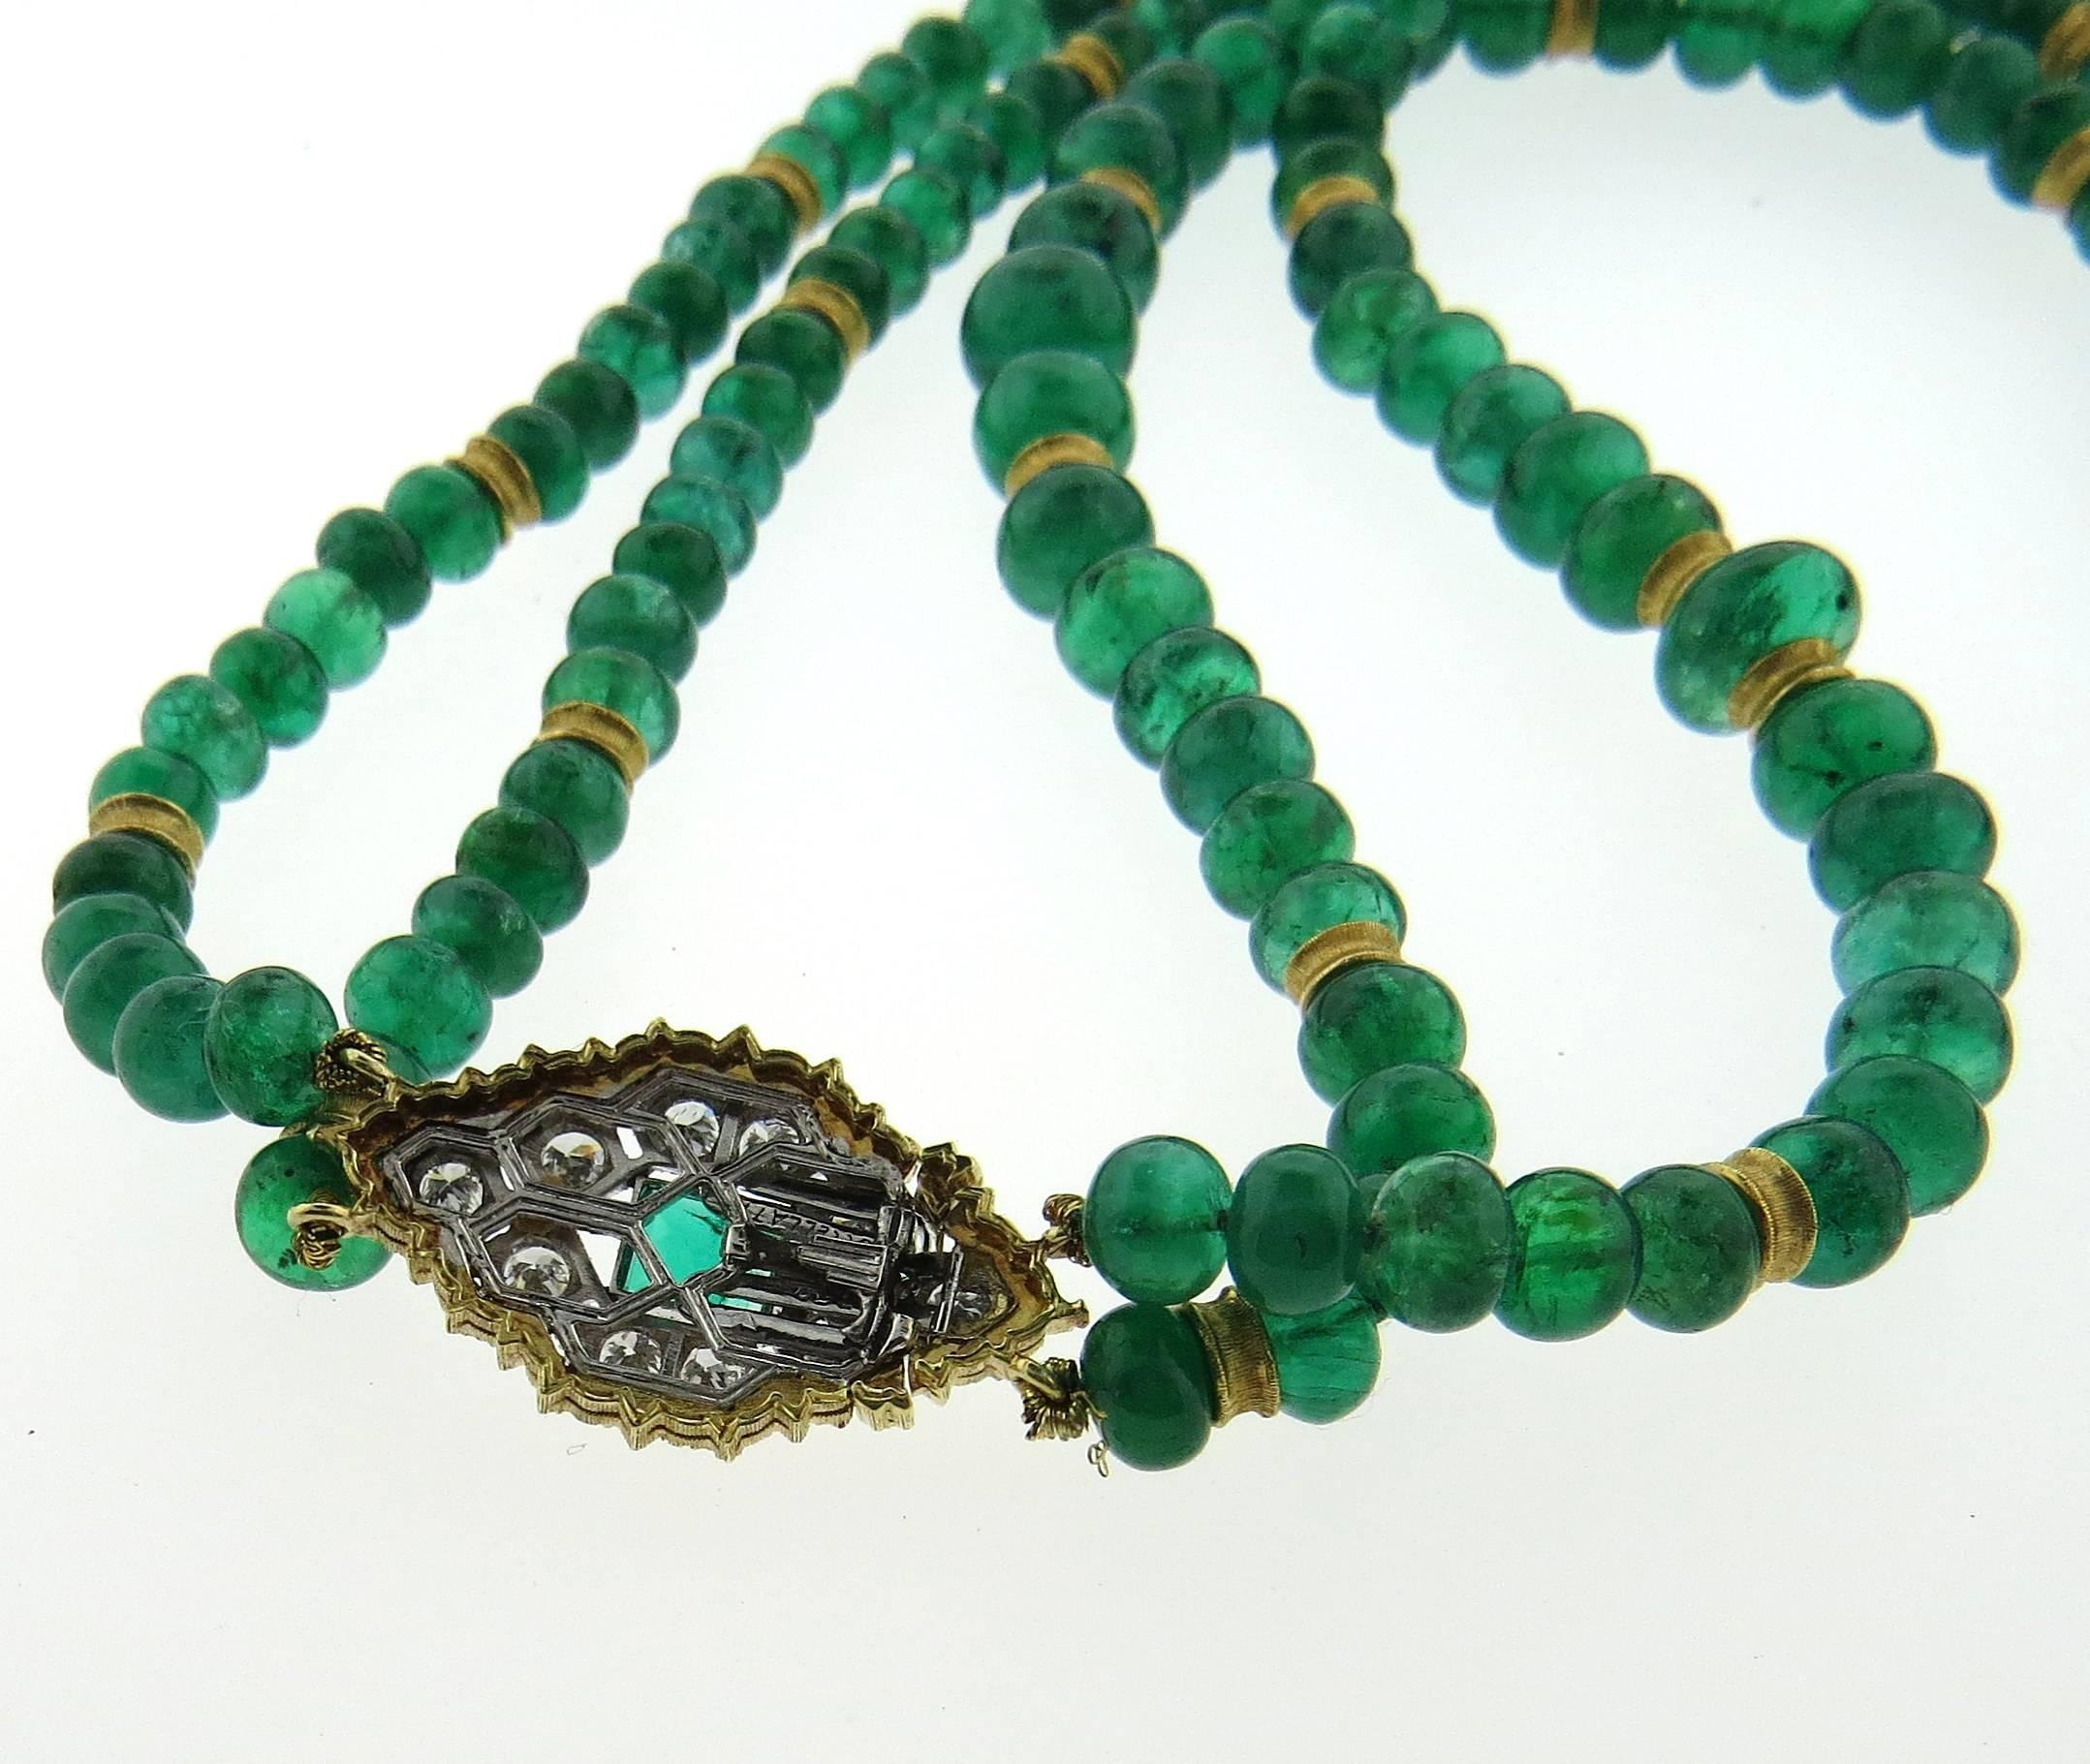 An 18k gold two strand necklace, crafted by Buccellati, featuring 5.5mm - 8mm emerald beads, and gold clasp, adorned with approximately 0.56ctw in G/VS diamonds and a rectangle emerald. Necklace with the clasp is 19 1/2